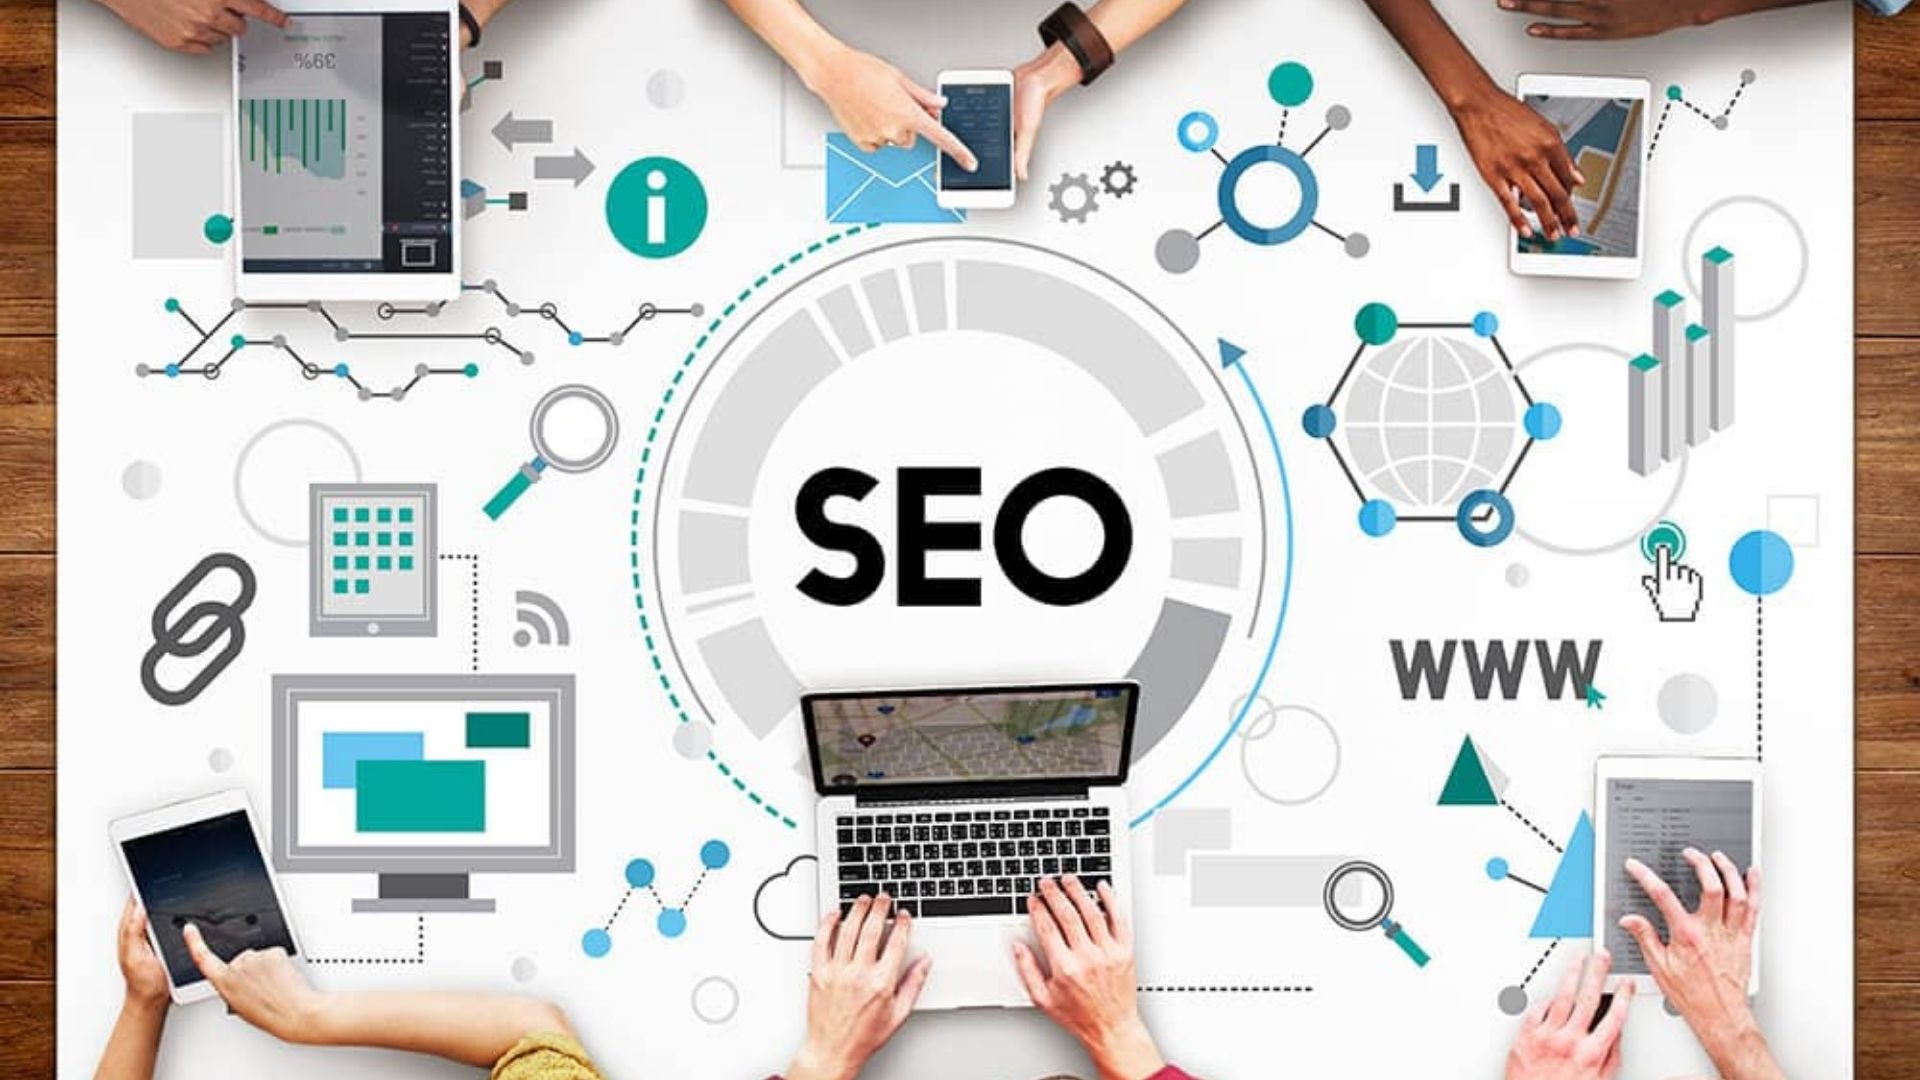 You might wonder how to get SEO clients, and you will need to learn more about how to do it, and that is why we prepared this guide.